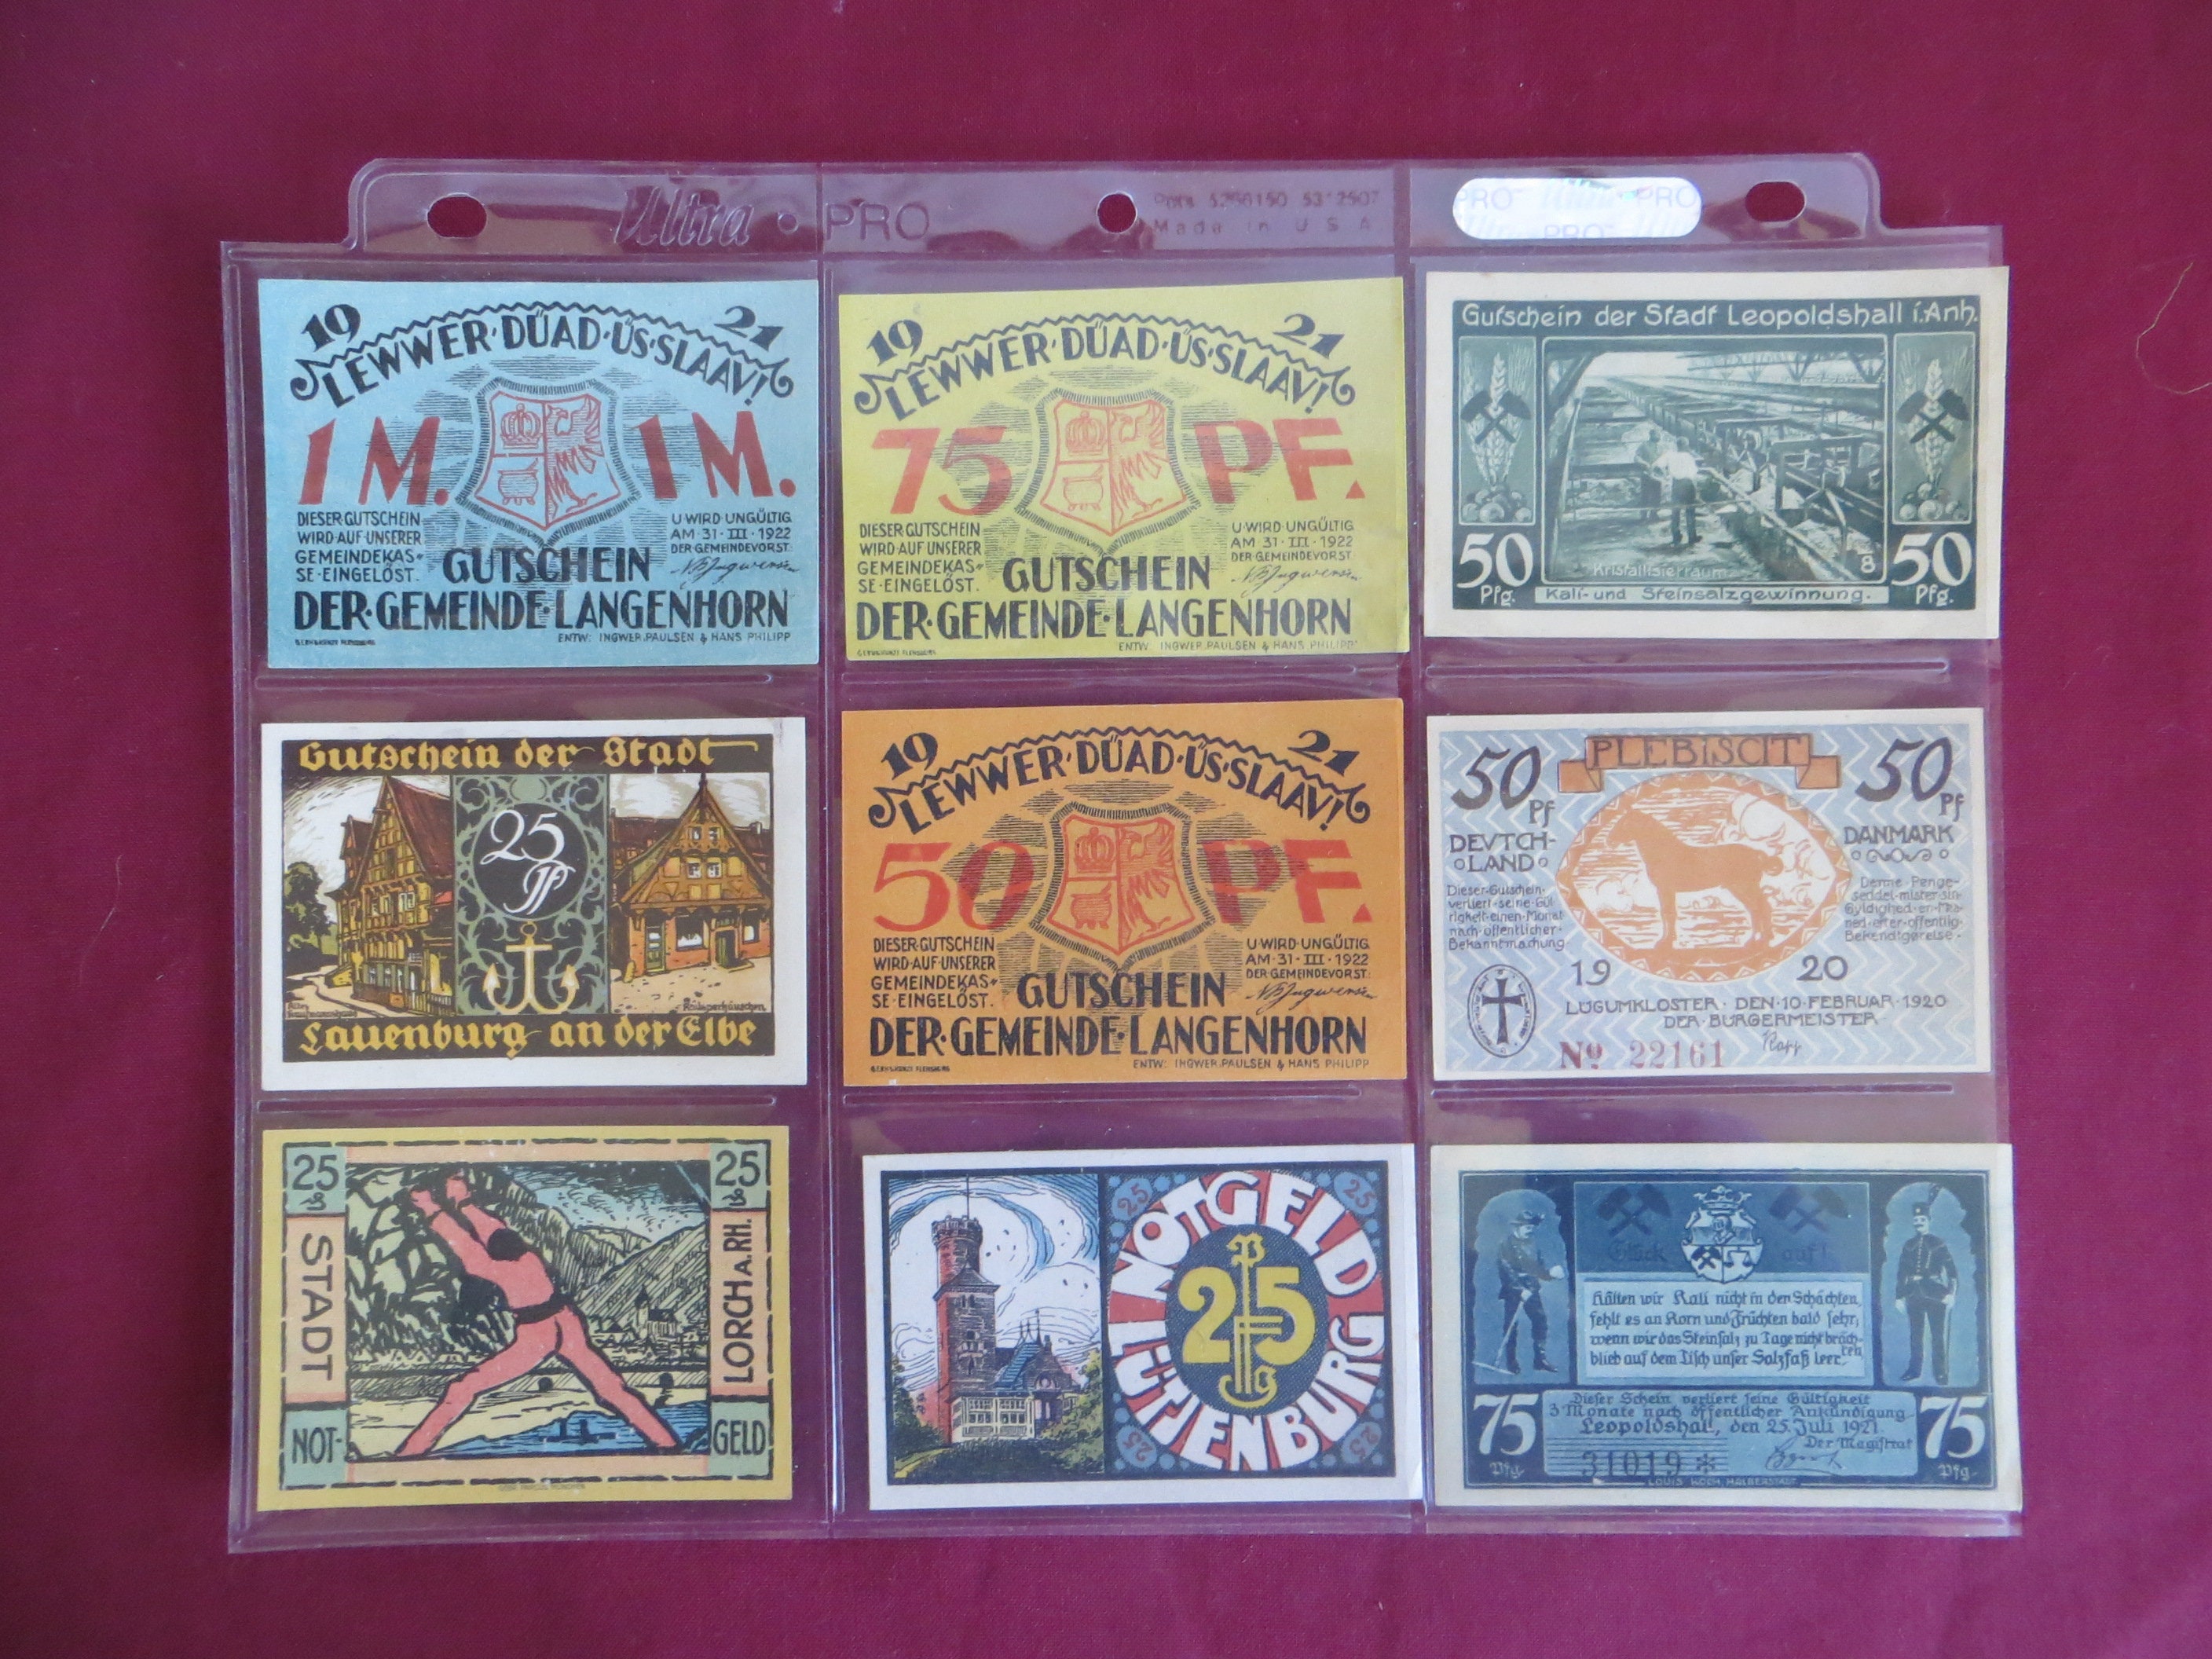 64 photo album pages of old German Not Geld notes aka FunMoney -  collectibles - by owner - sale - craigslist